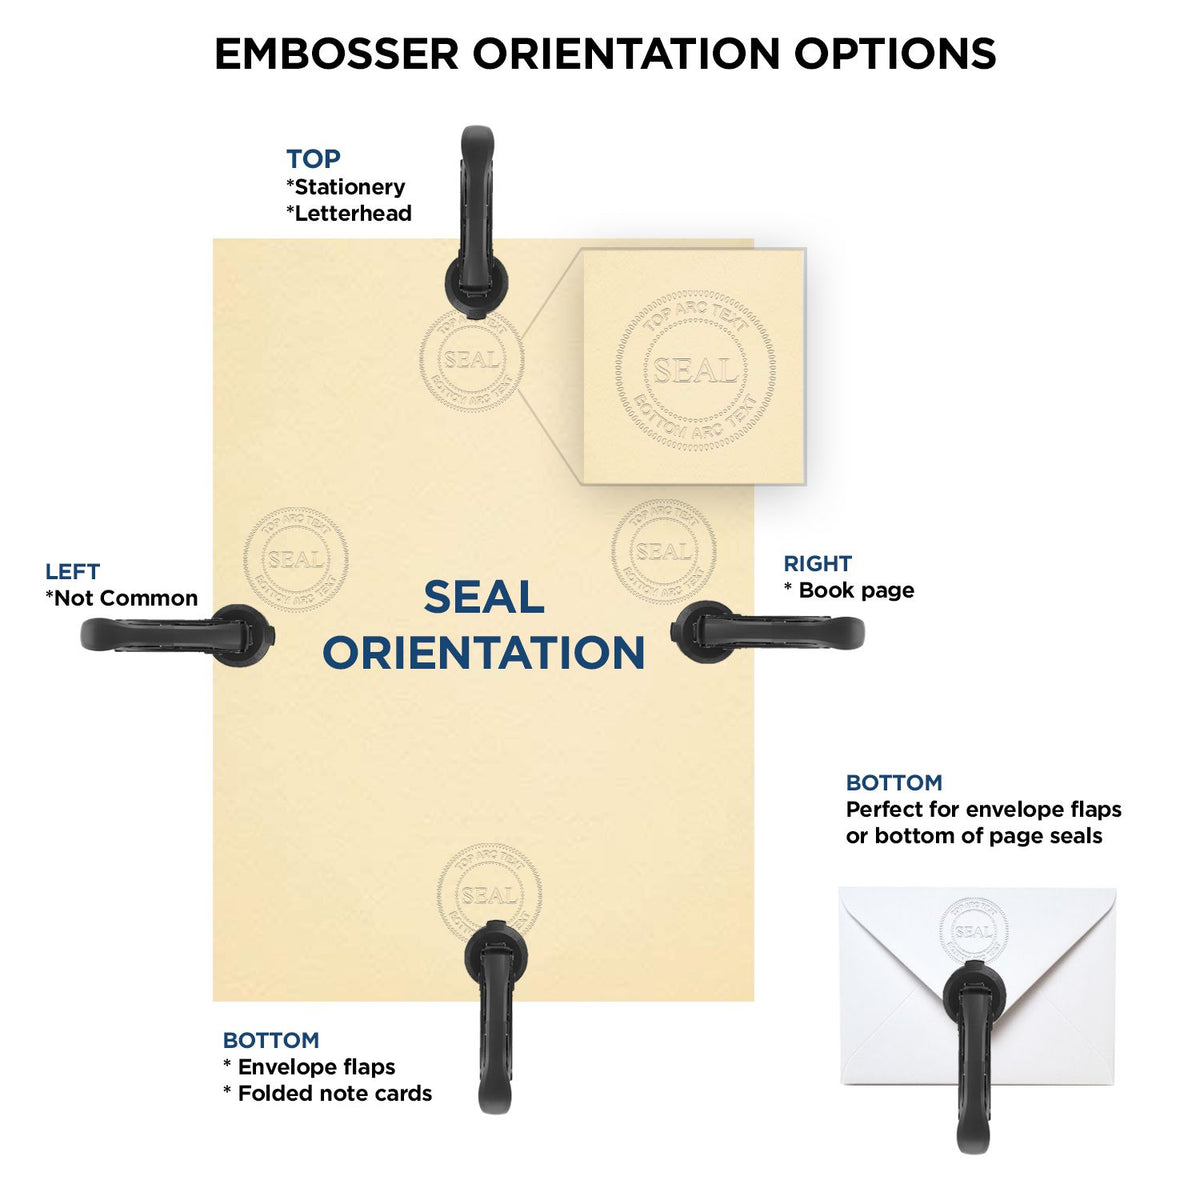 An infographic for the Handheld Connecticut Architect Seal Embosser showing embosser orientation, this is showing examples of a top, bottom, right and left insert.